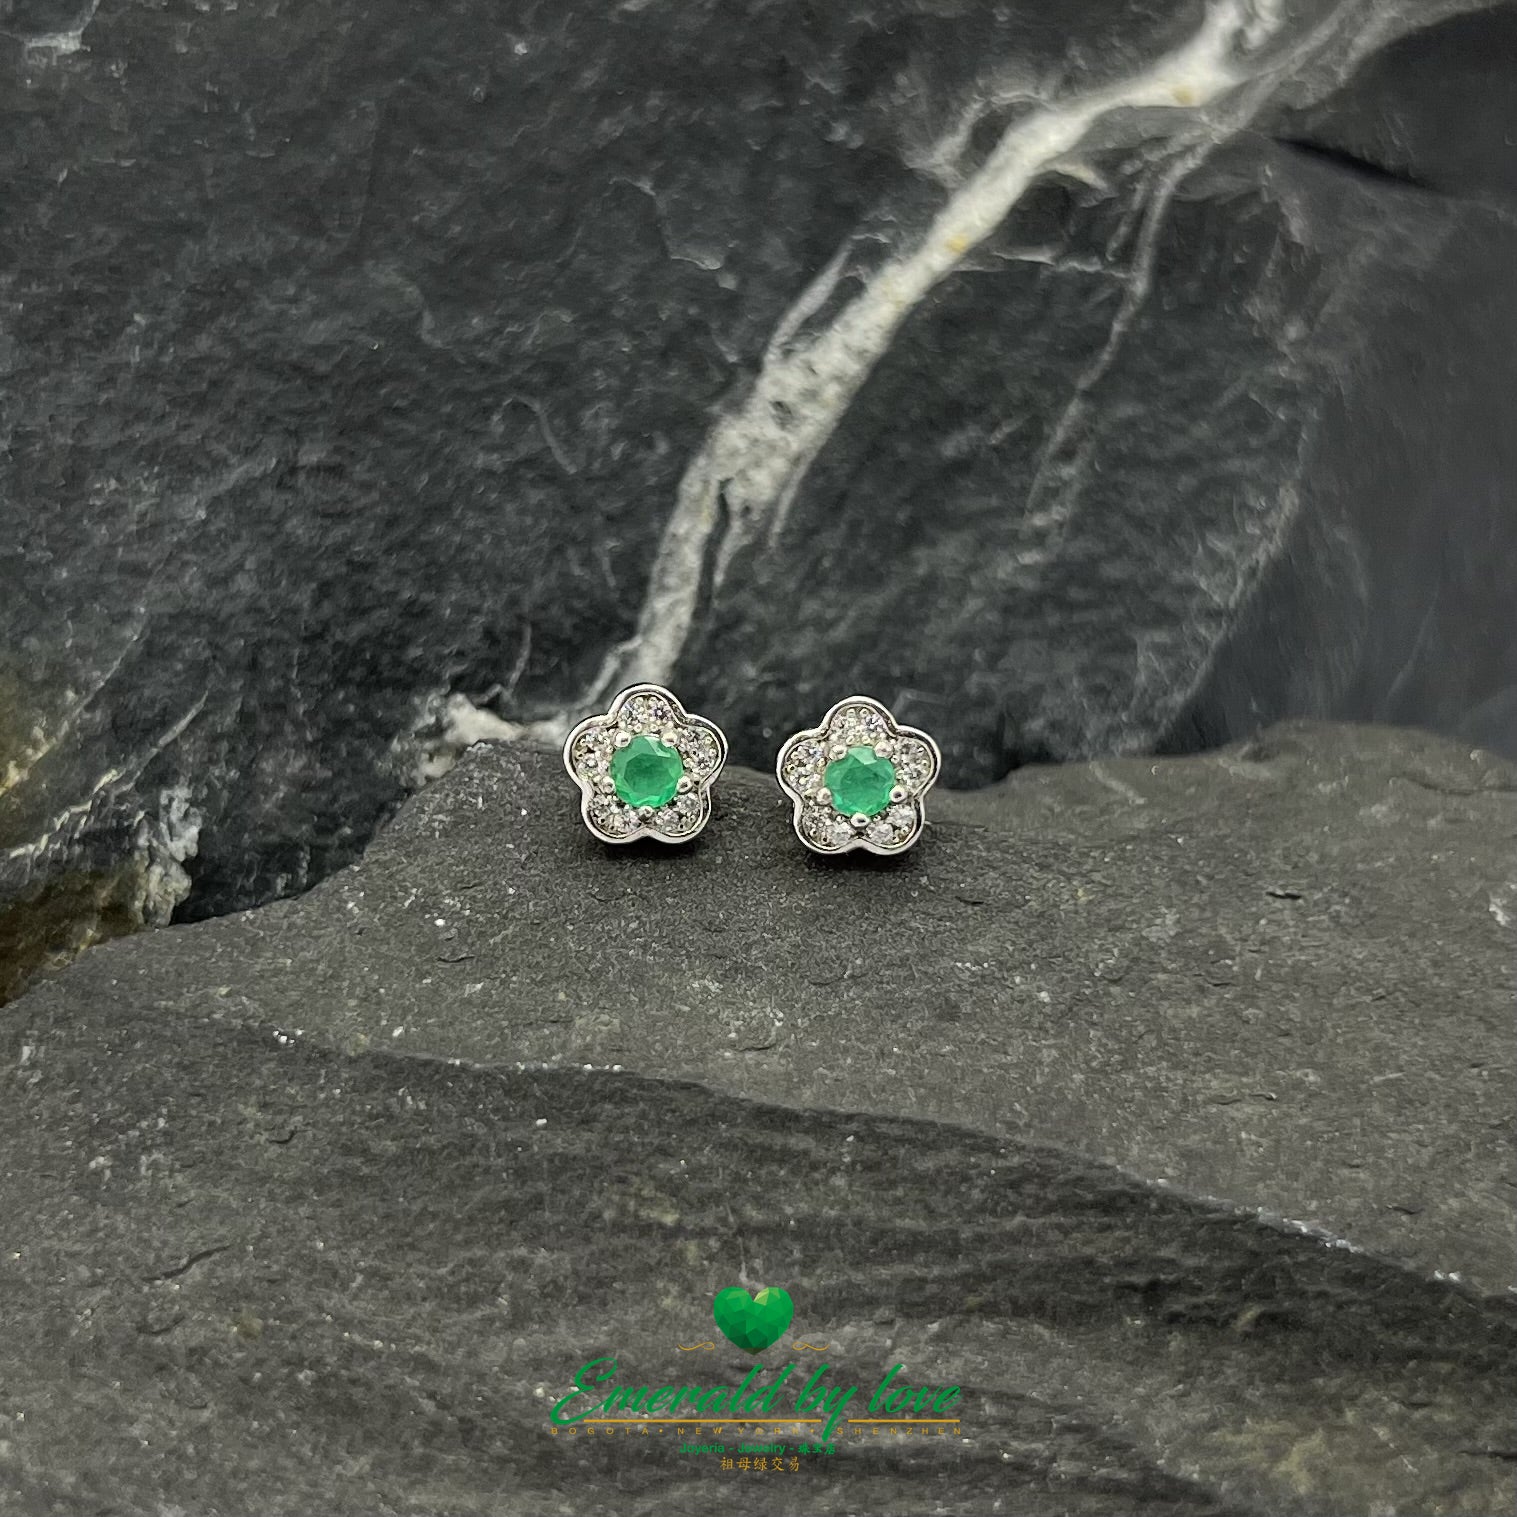 Tiny Floral Sterling Silver Earrings with Round Crystal Central Emerald